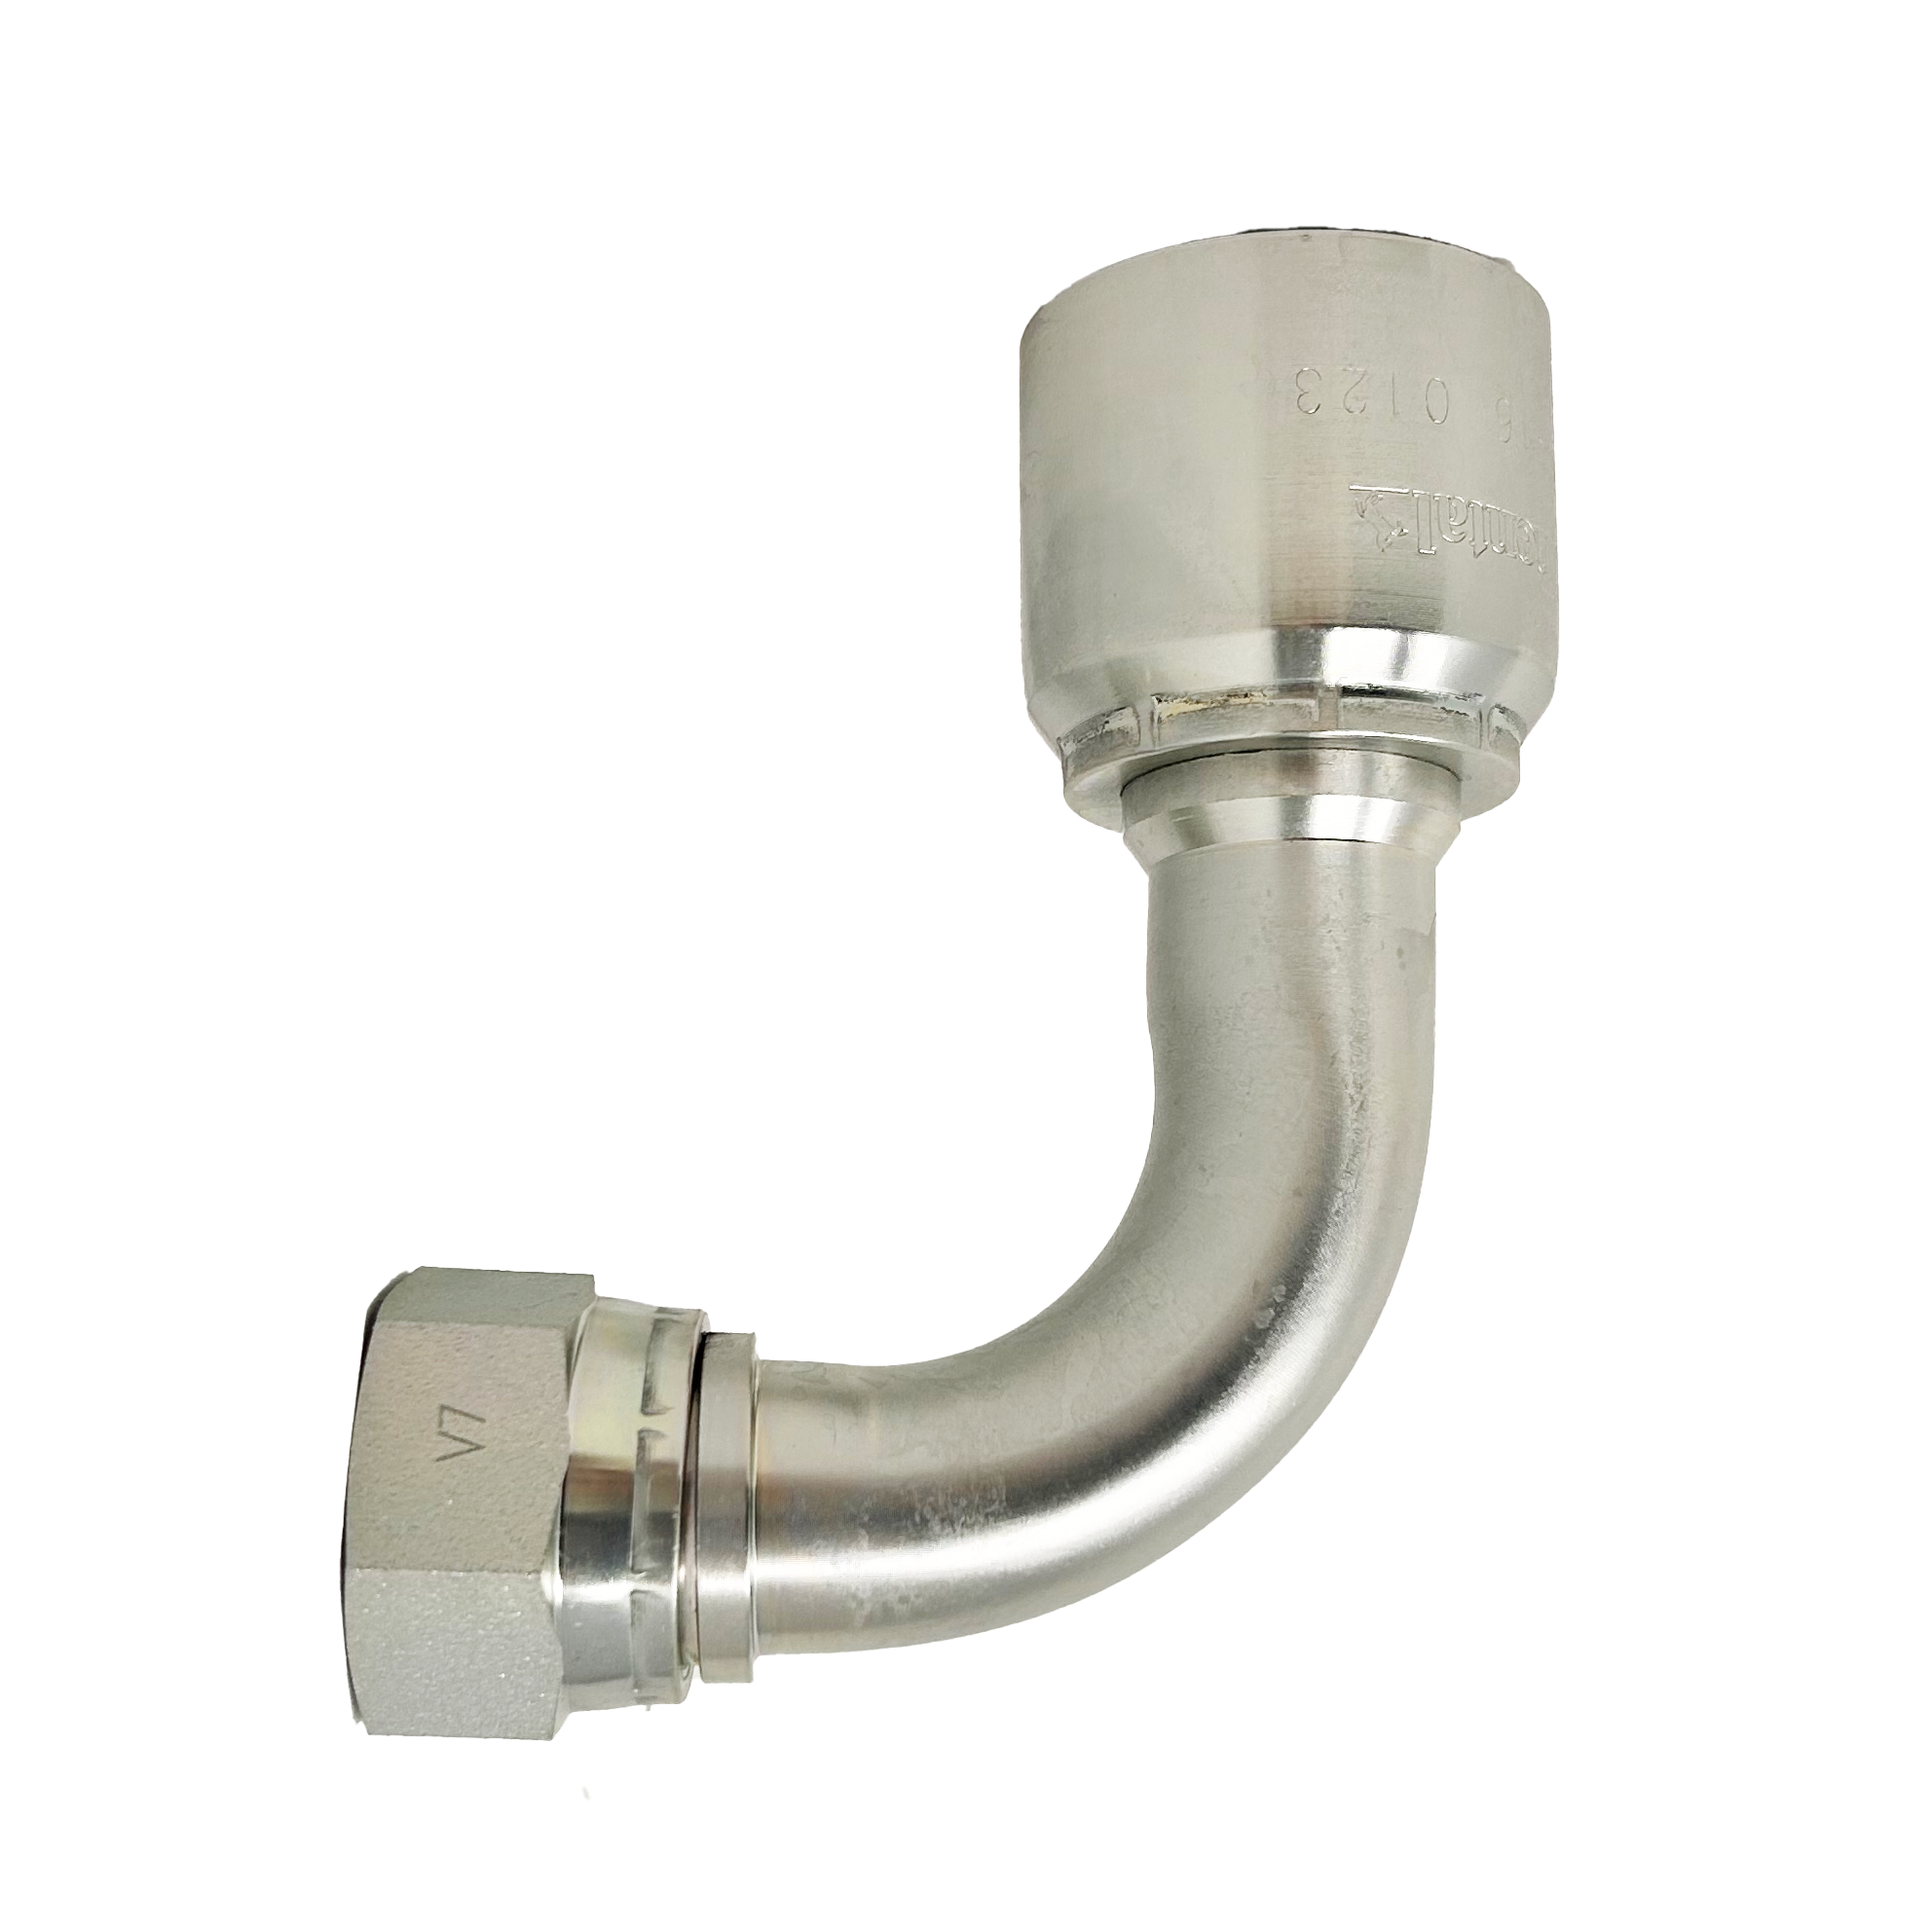 B2-JCFX90-0608S: Continental Hose Fitting, 0.375 (3/8") Hose ID x 3/4-16 Female JIC, 90-Degree Swivel Connection